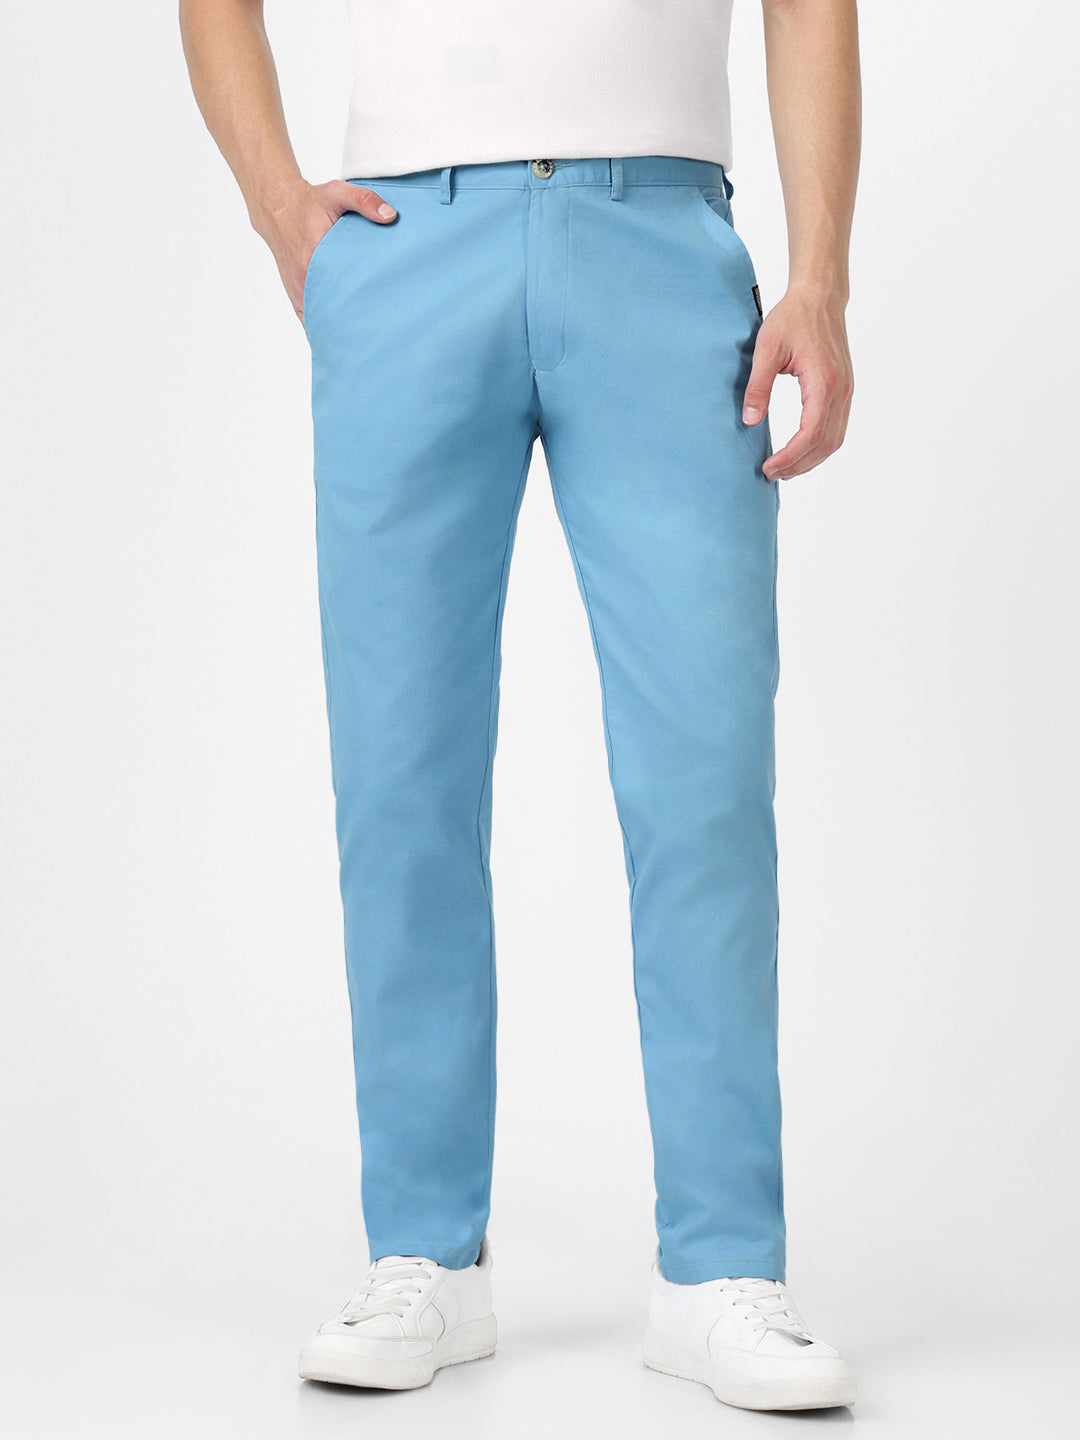 Men's Blue Cotton Light Weight Non-Stretch Slim Fit Casual Trousers